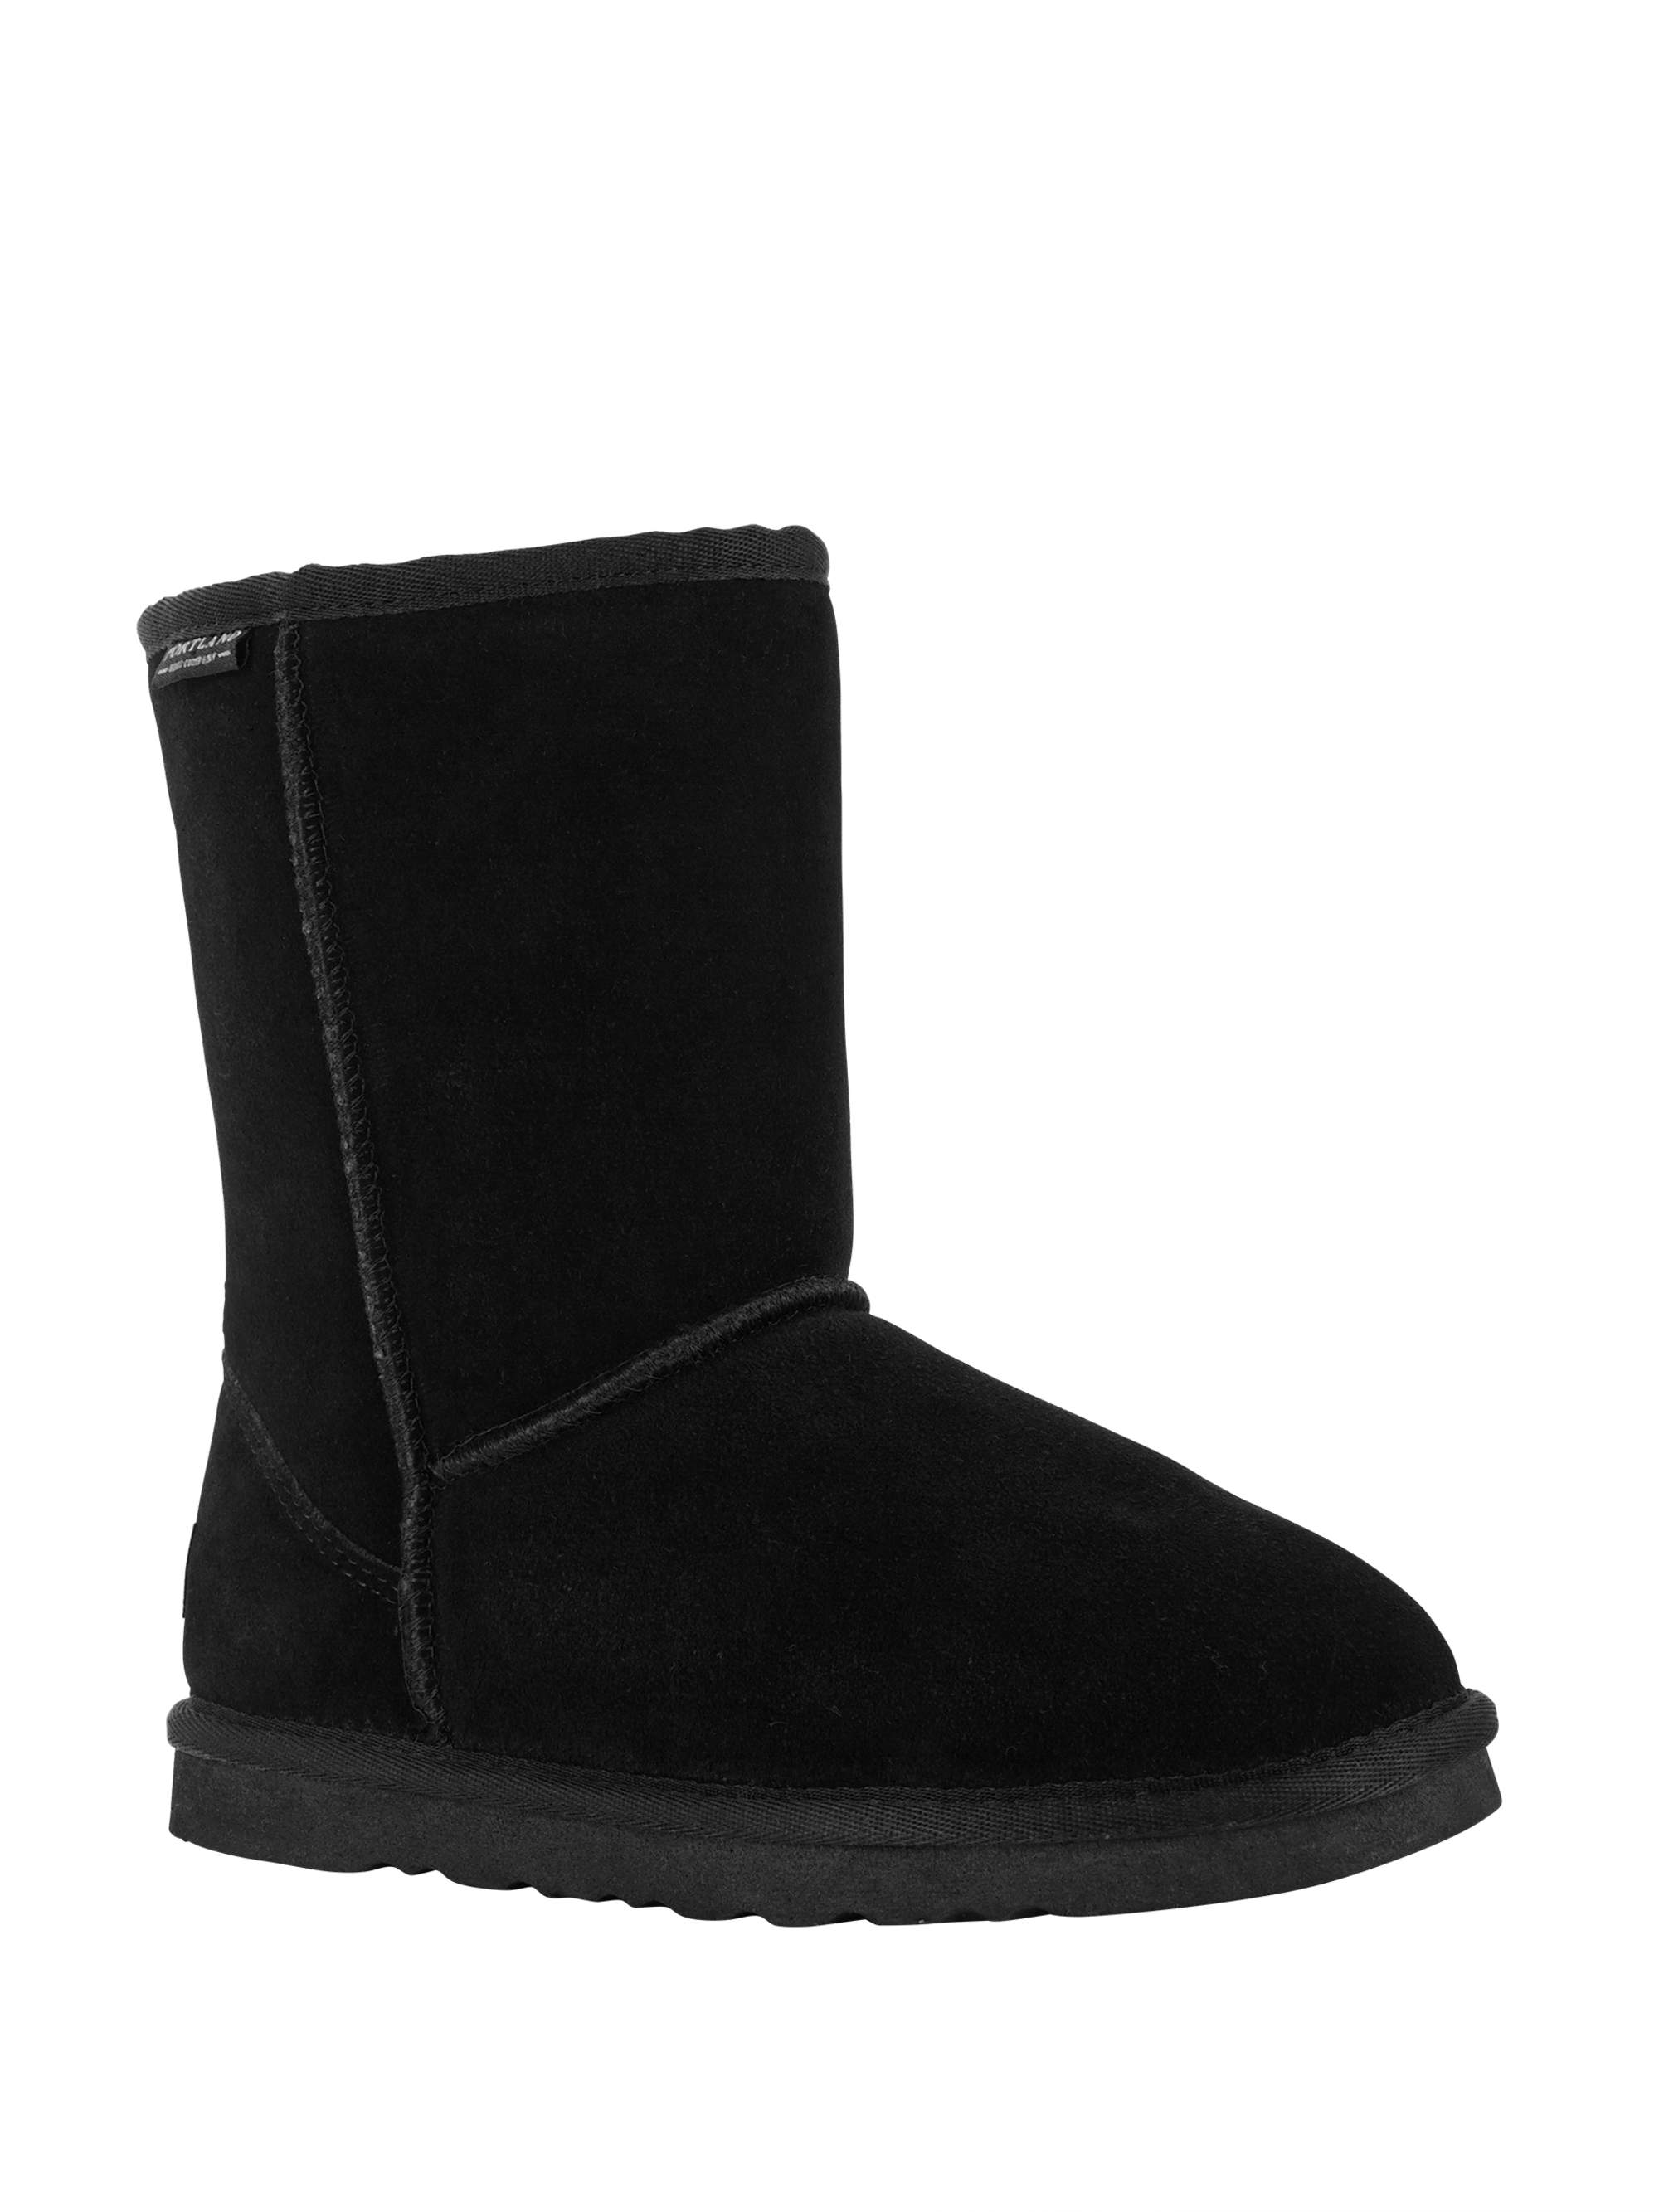 Portland Boot Company Women's Maryanne 8" Suede Winter Boot - image 1 of 5